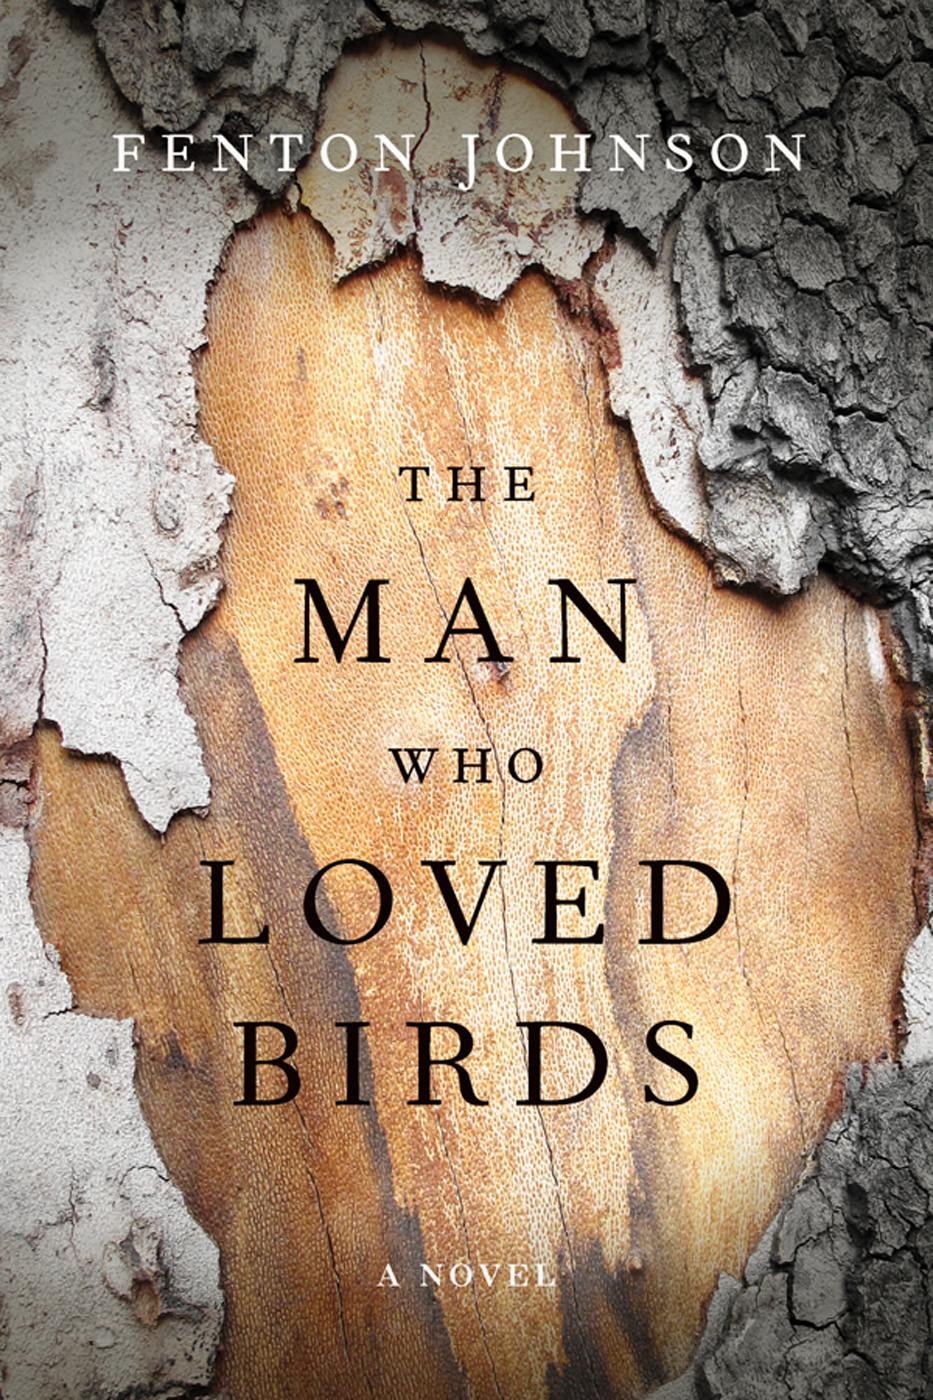 The Man Who Loved Birds (2016) by Fenton Johnson